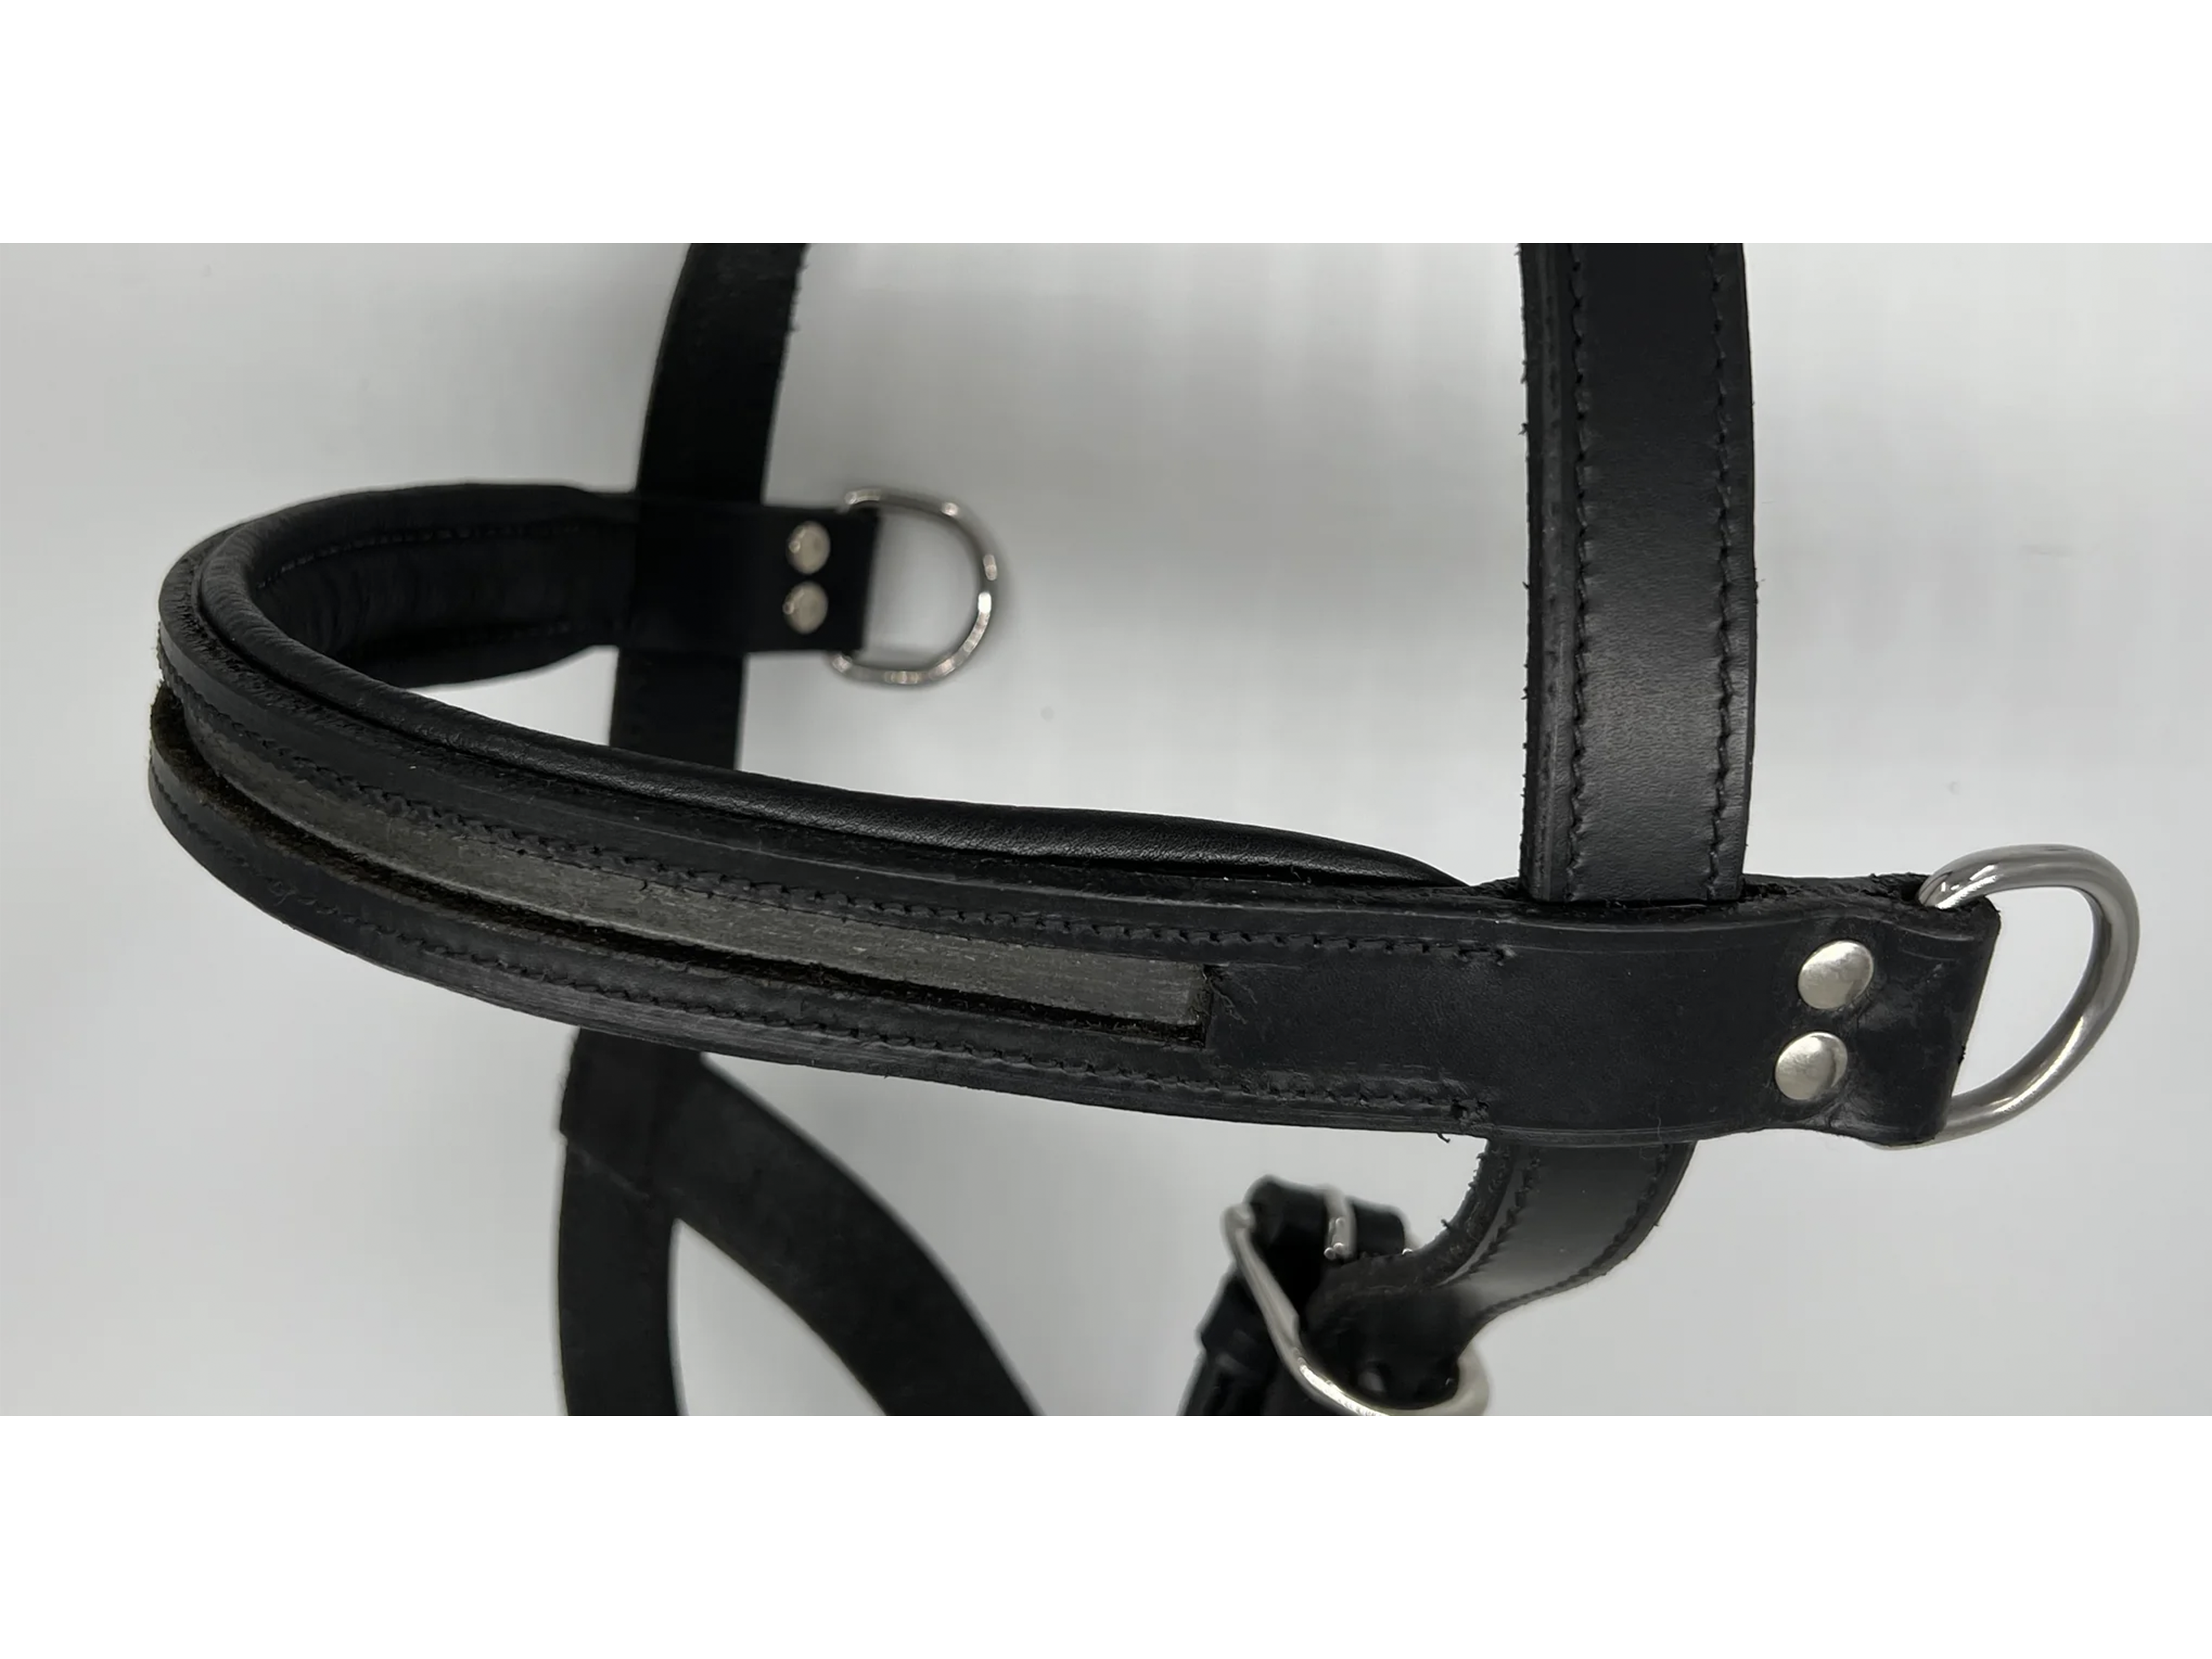 Empty Open Channel Lunge Cavesson Browband